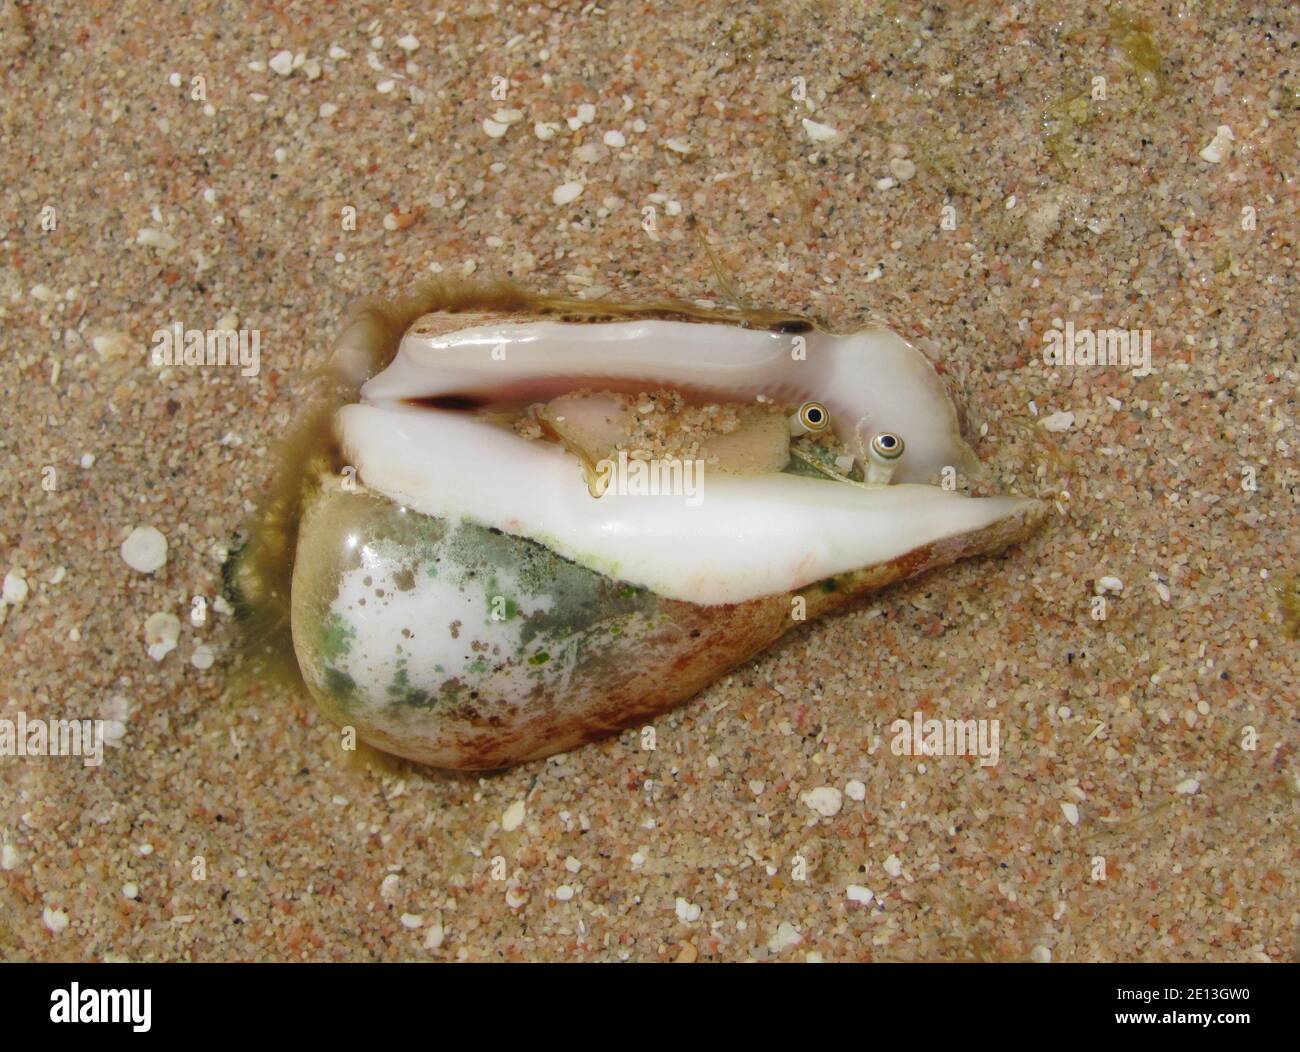 Dangerous venomous cone snail, clam in the water on the shore. Stock Photo